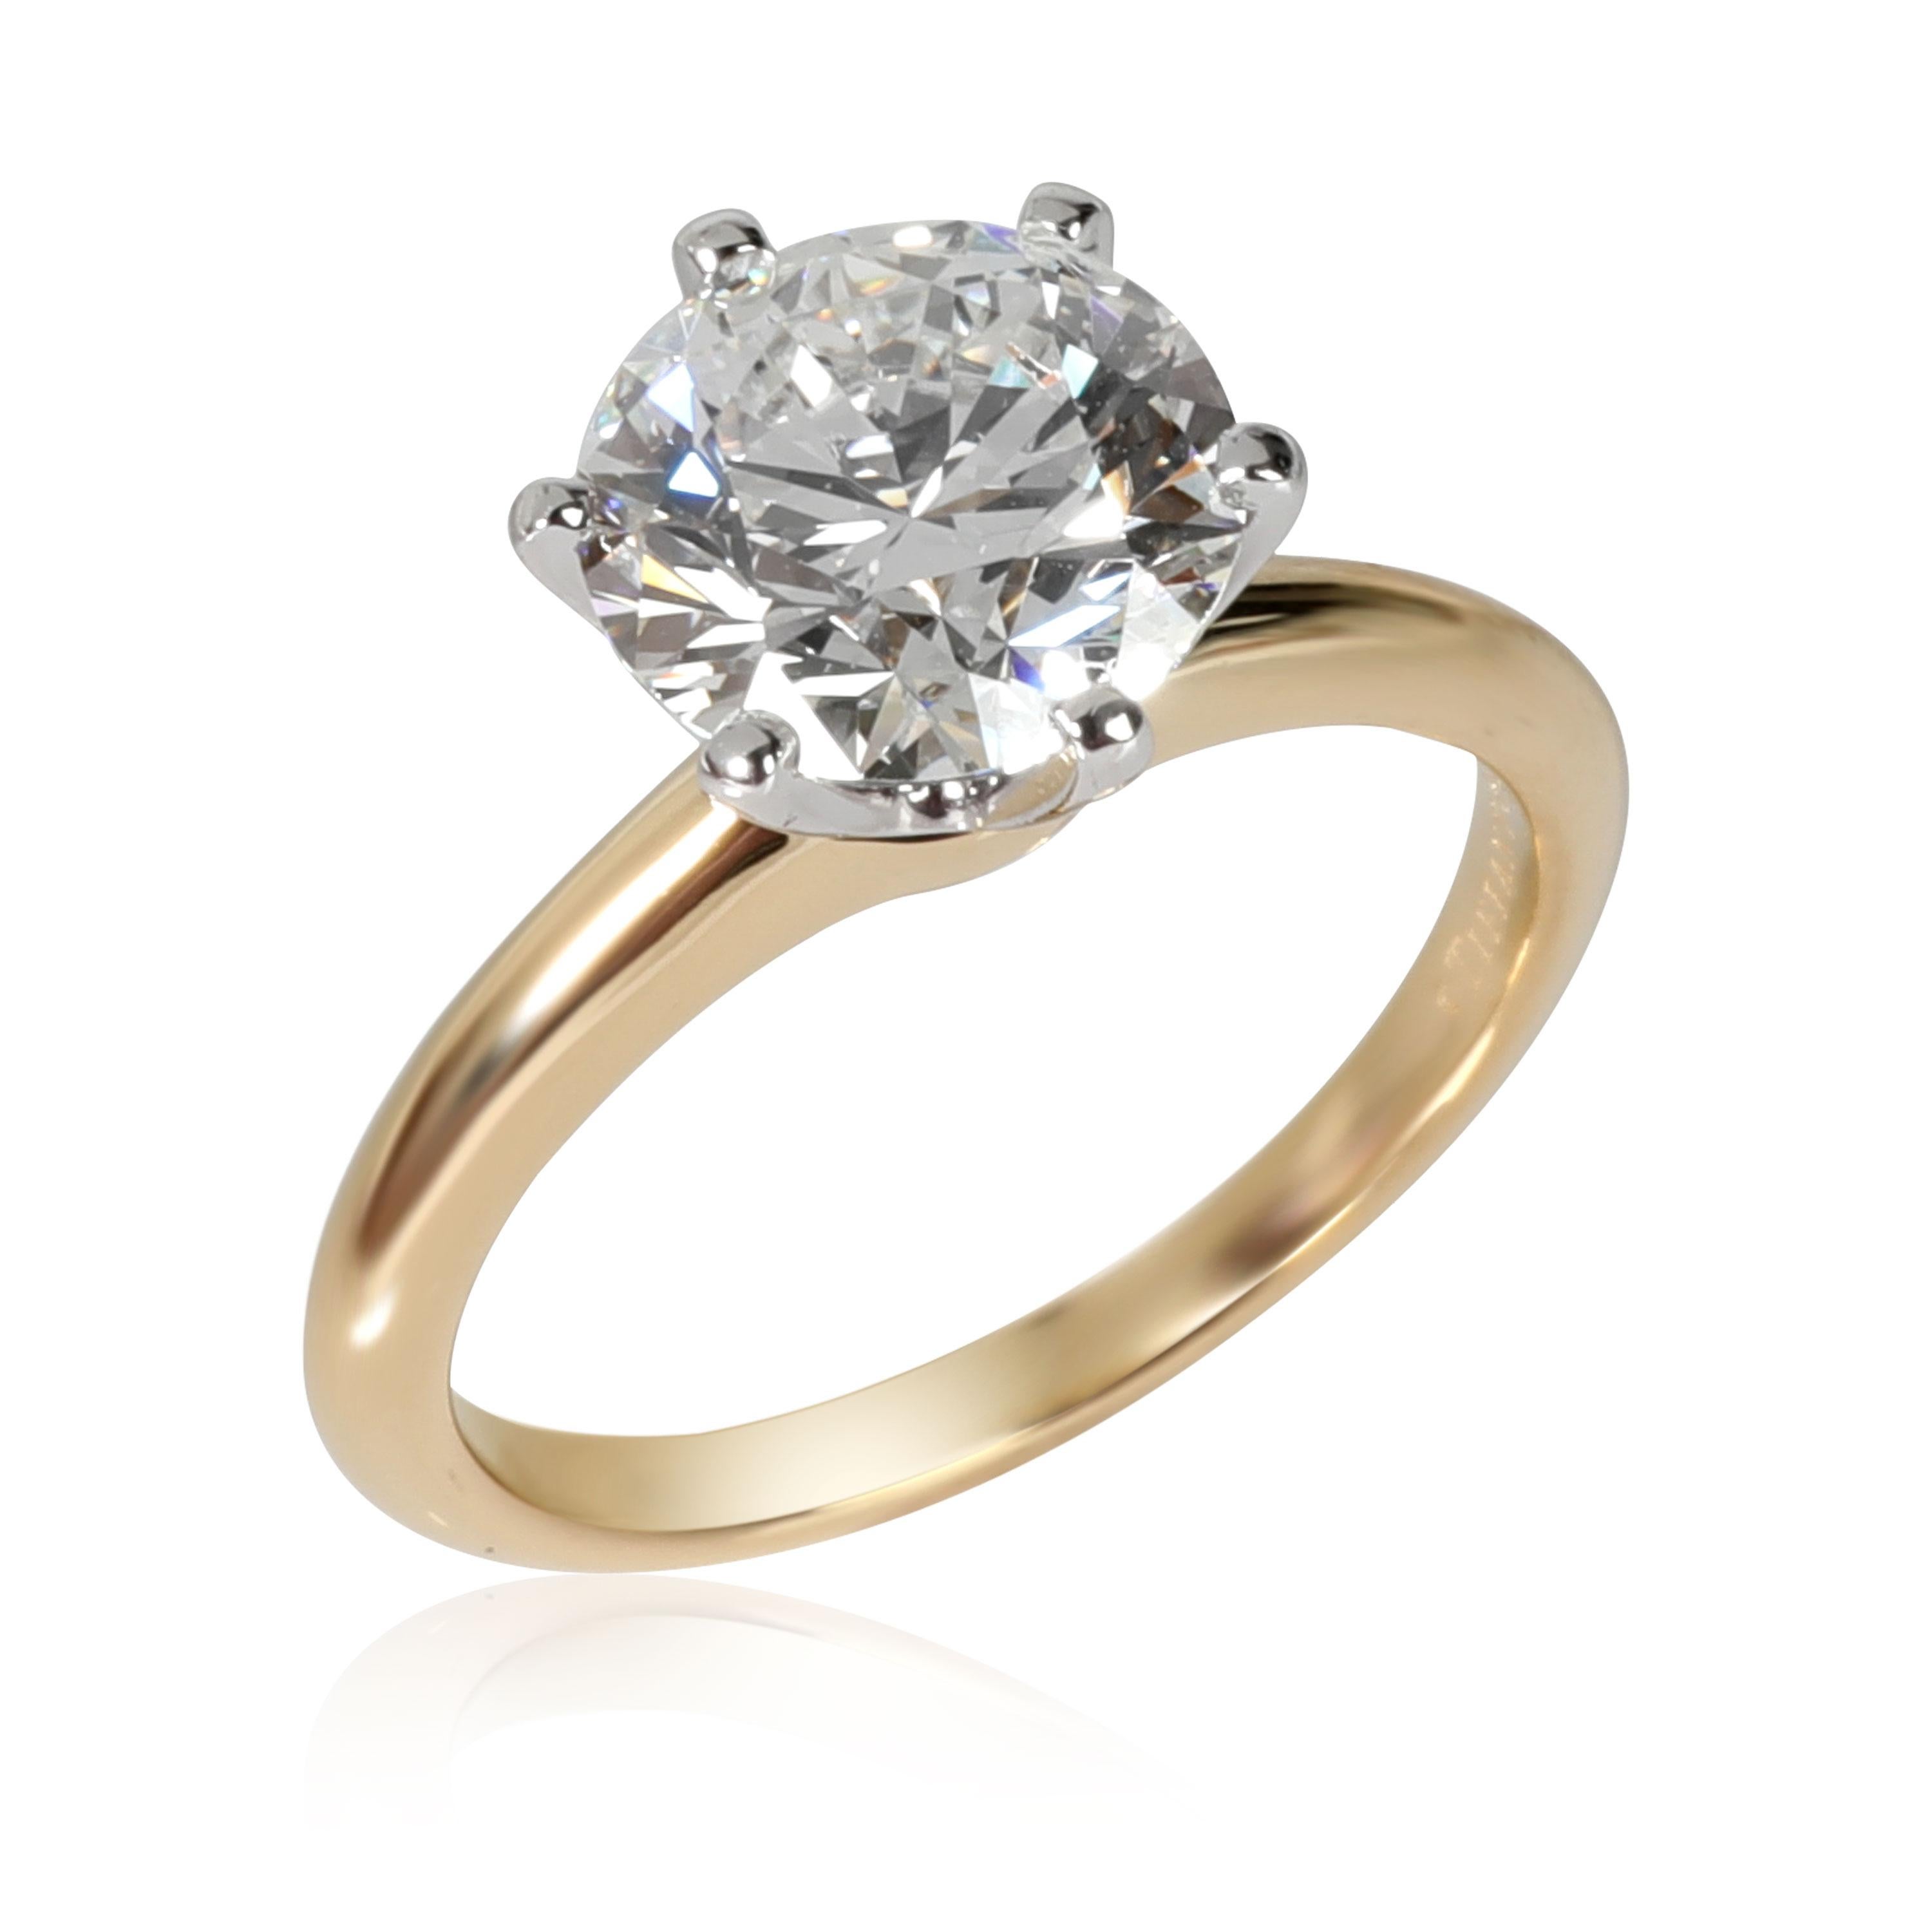 Tiffany & Co. Diamond Engagement Ring in 18K Yellow Gold/Platinum I VS1 2.34 CTW

PRIMARY DETAILS
SKU: 114223
Listing Title: Tiffany & Co. Diamond Engagement Ring in 18K Yellow Gold/Platinum I VS1 2.34 CTW
Condition Description: Retails for 54,000